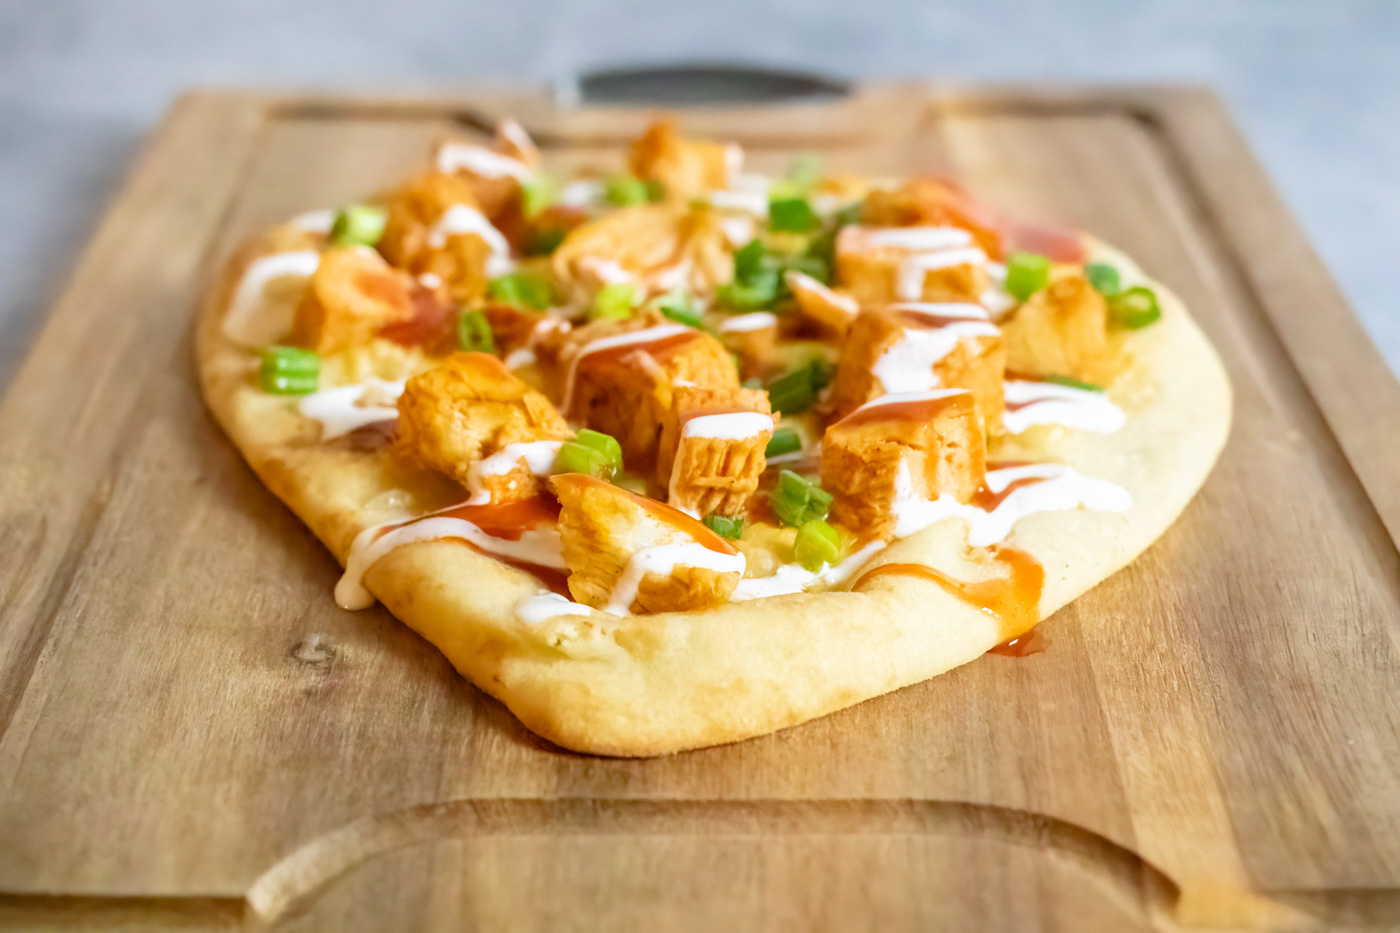 Buffalo chicken flatbread being served on a wooden cutting board